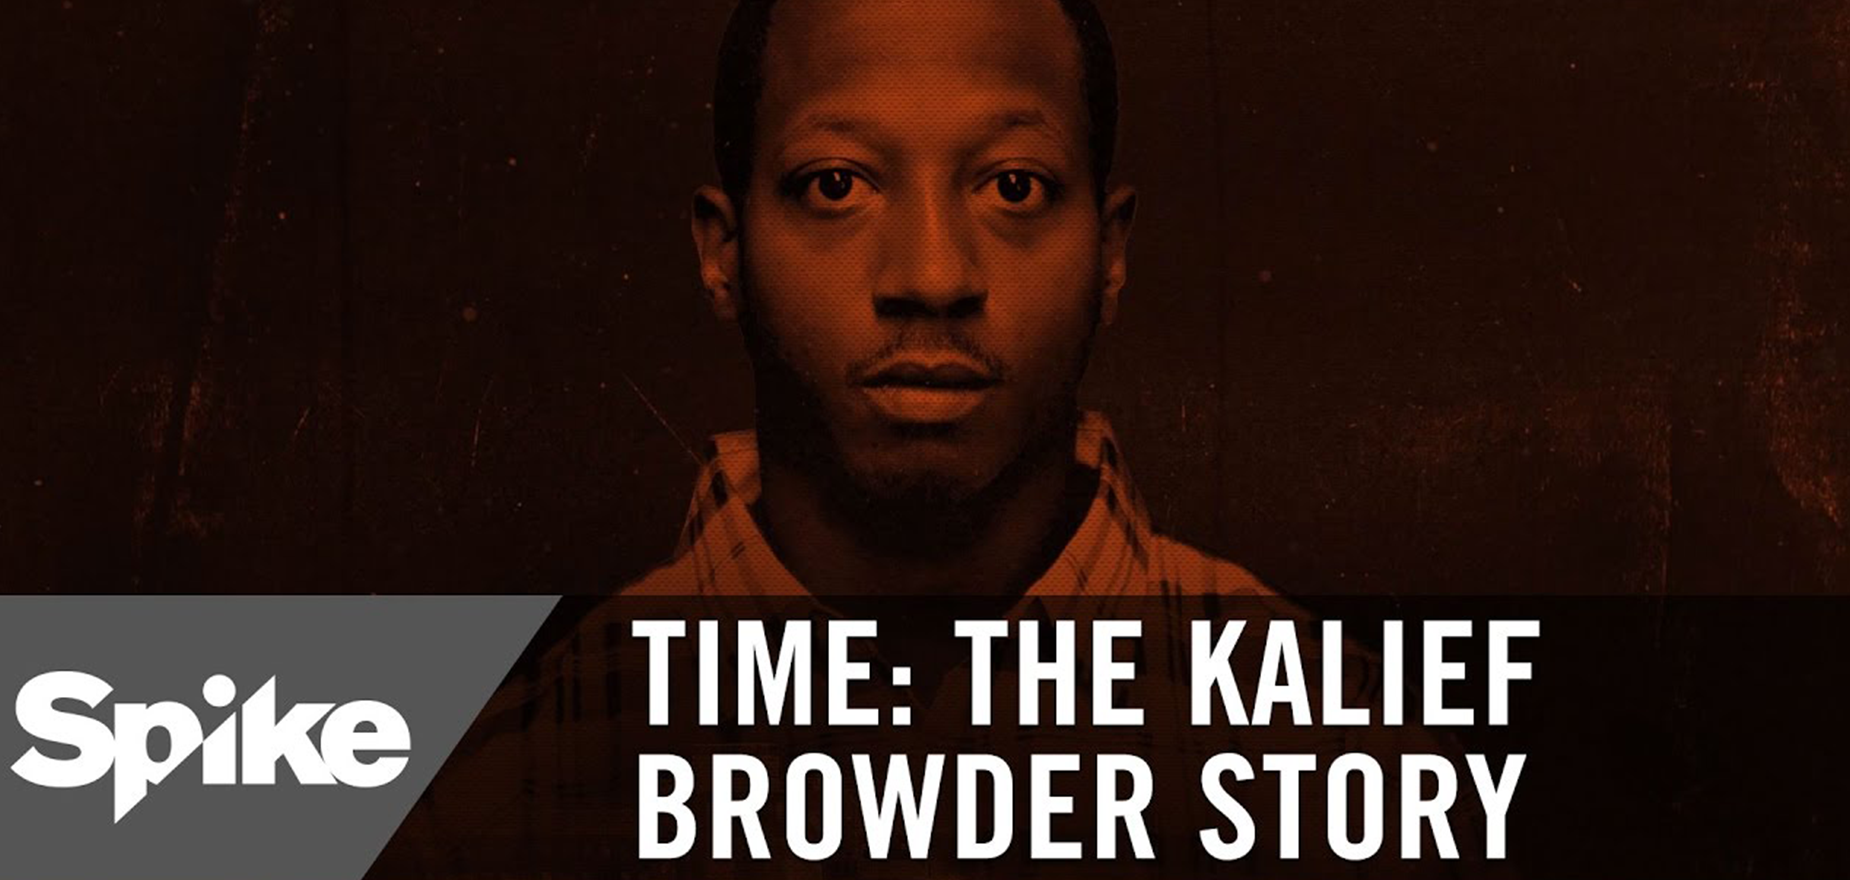 TIME: The Kalief Browder Story - Spike TV, The Cinemart, Roc Nation